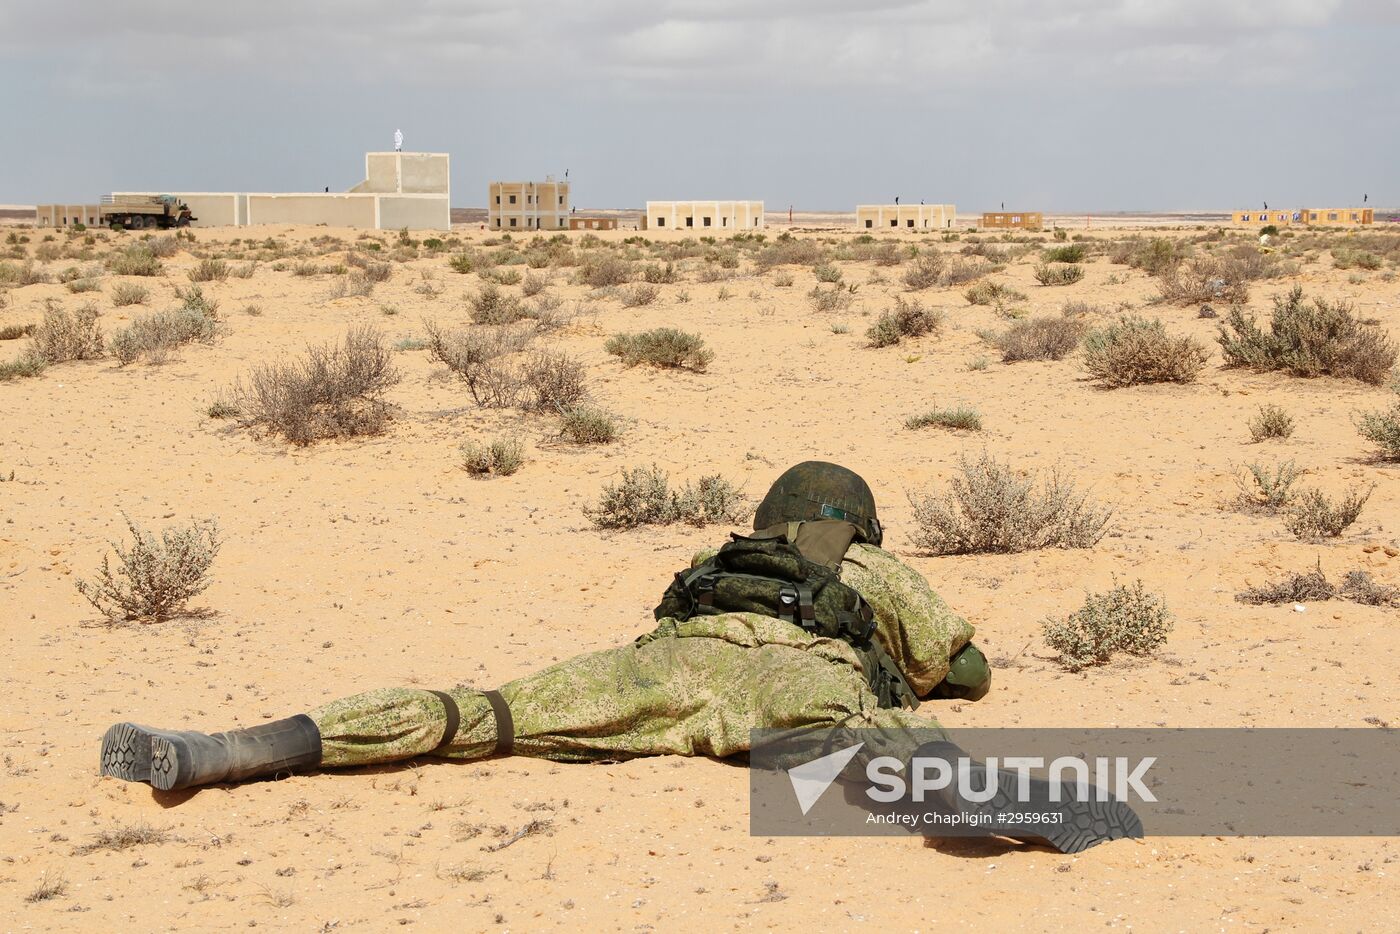 2016 Defenders of Friendship Russian-Egyptian counter terrorism exercise. Day Five